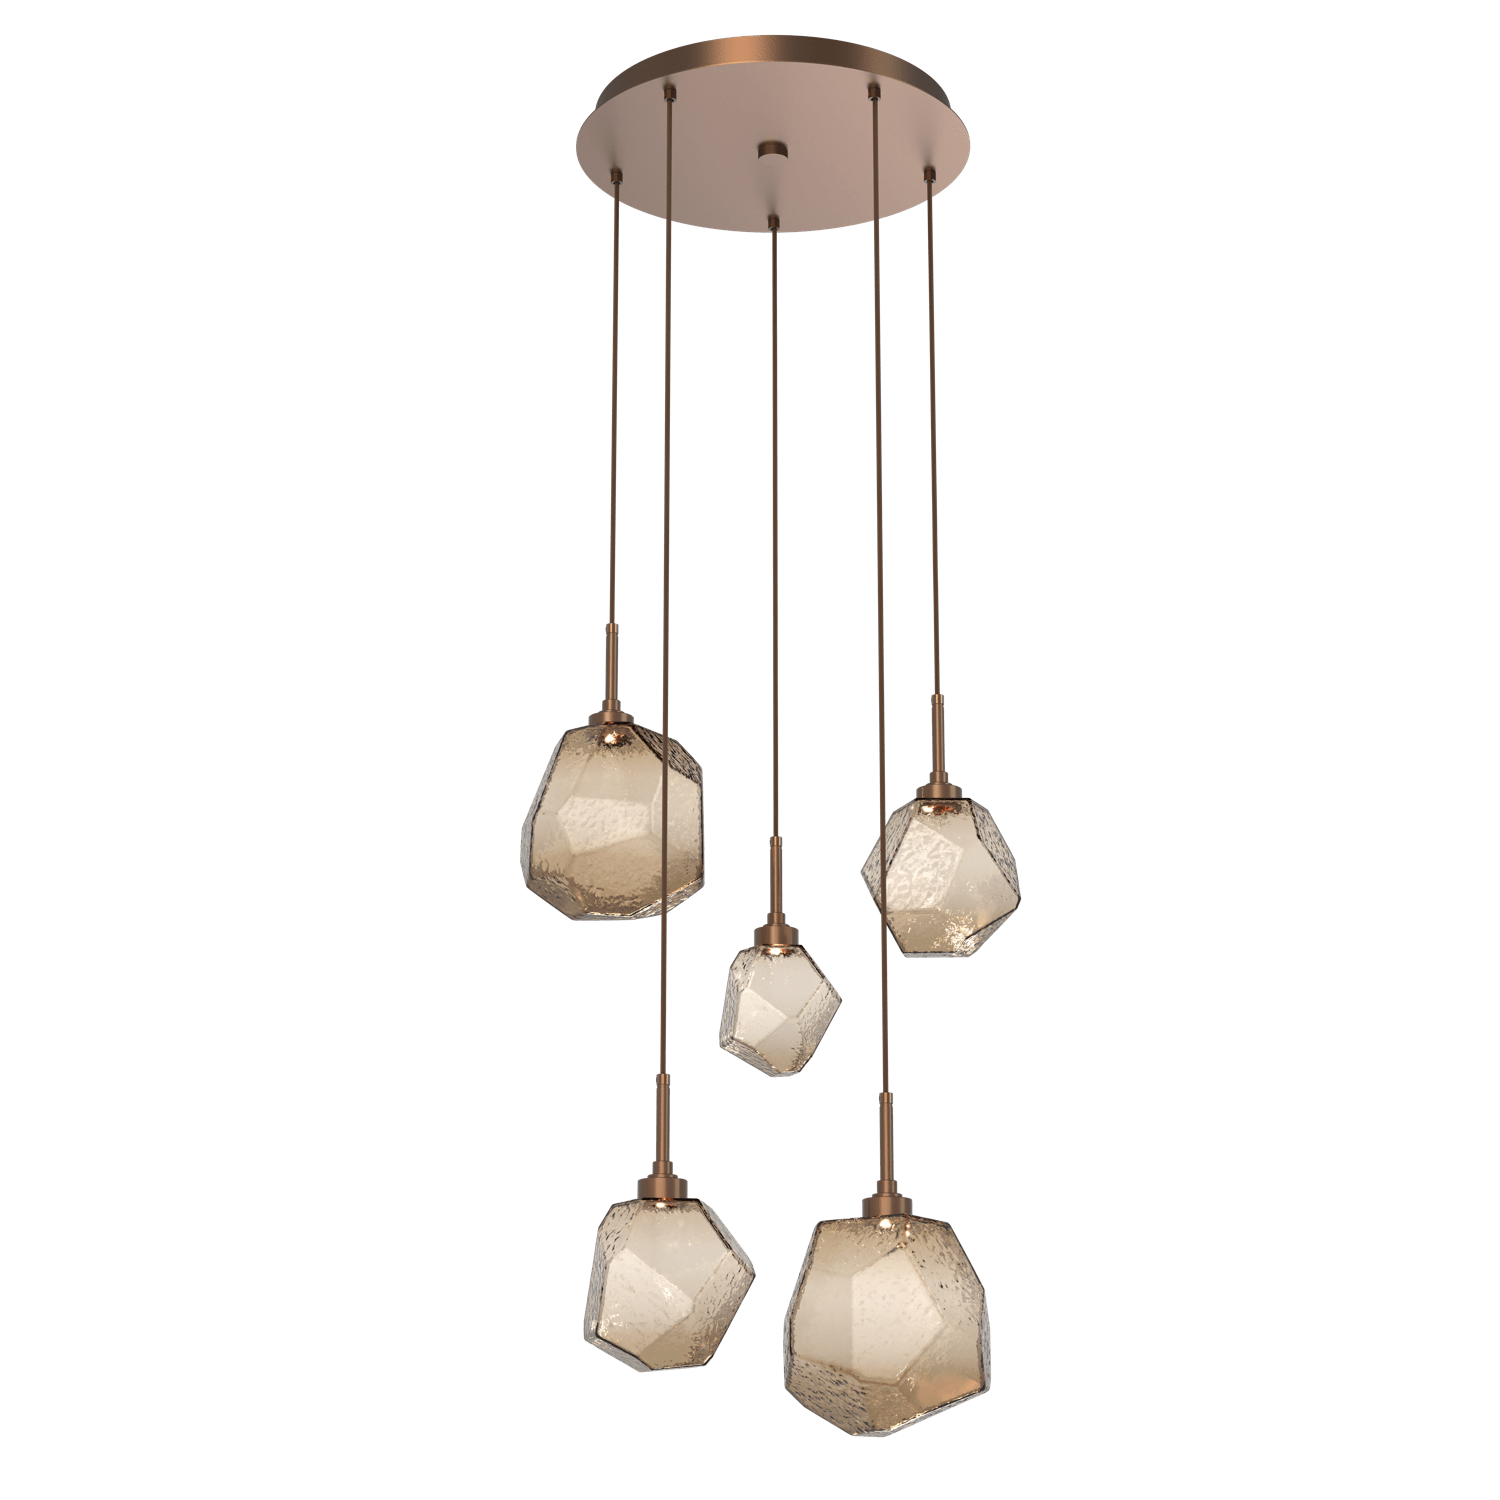 CHB0039-05-BB-B-Hammerton-Studio-Gem-5-light-round-pendant-chandelier-with-burnished-bronze-finish-and-bronze-blown-glass-shades-and-LED-lamping